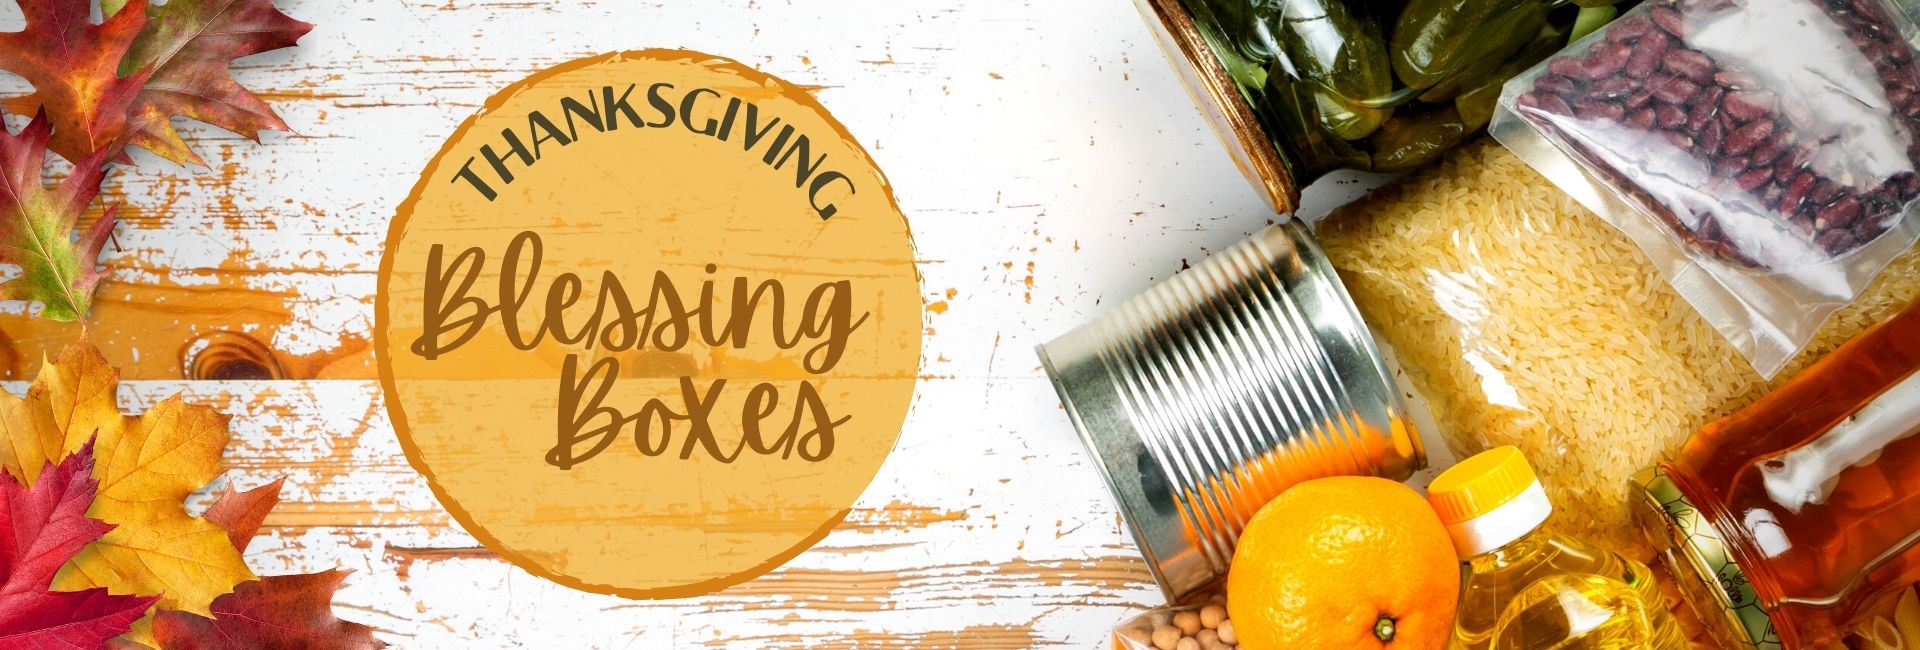 Thanksgiving Blessing Boxes 4 Web 2022